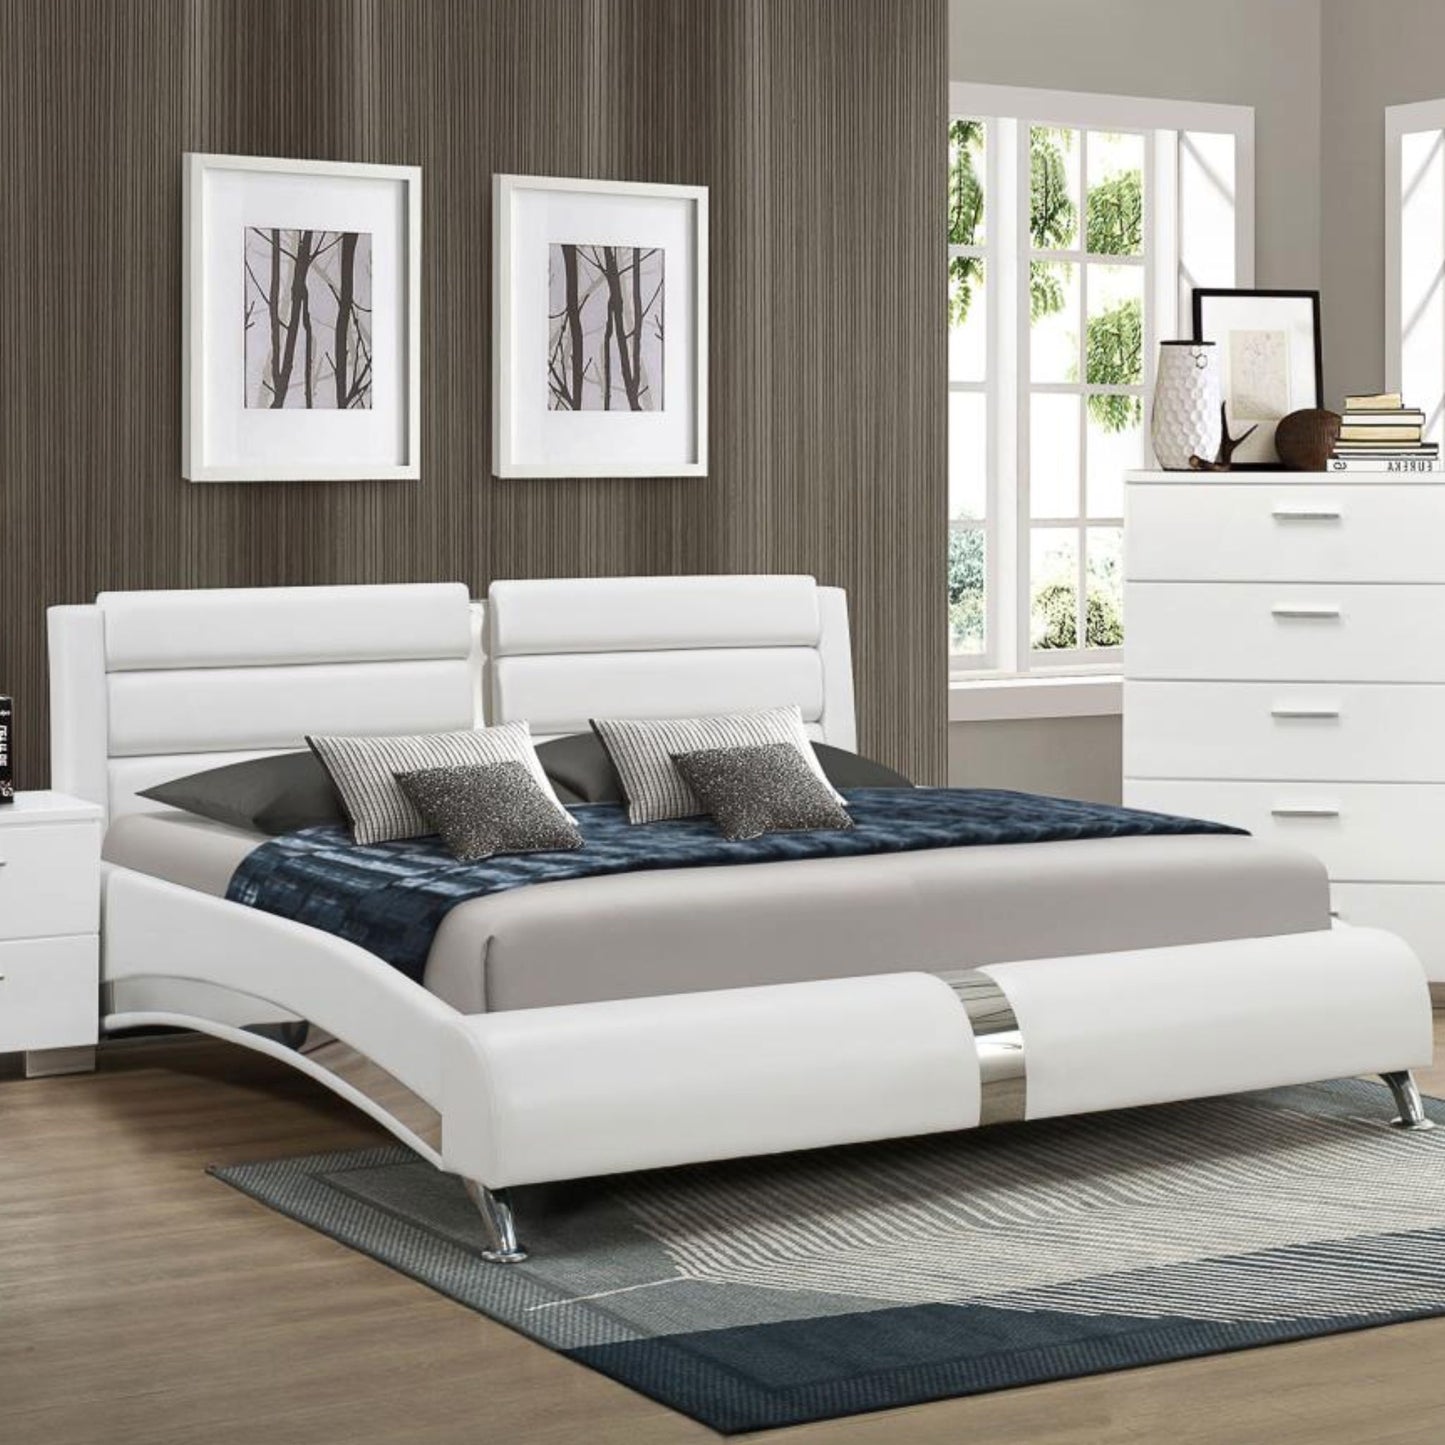 JEREMAINE Queen Upholstered Bed